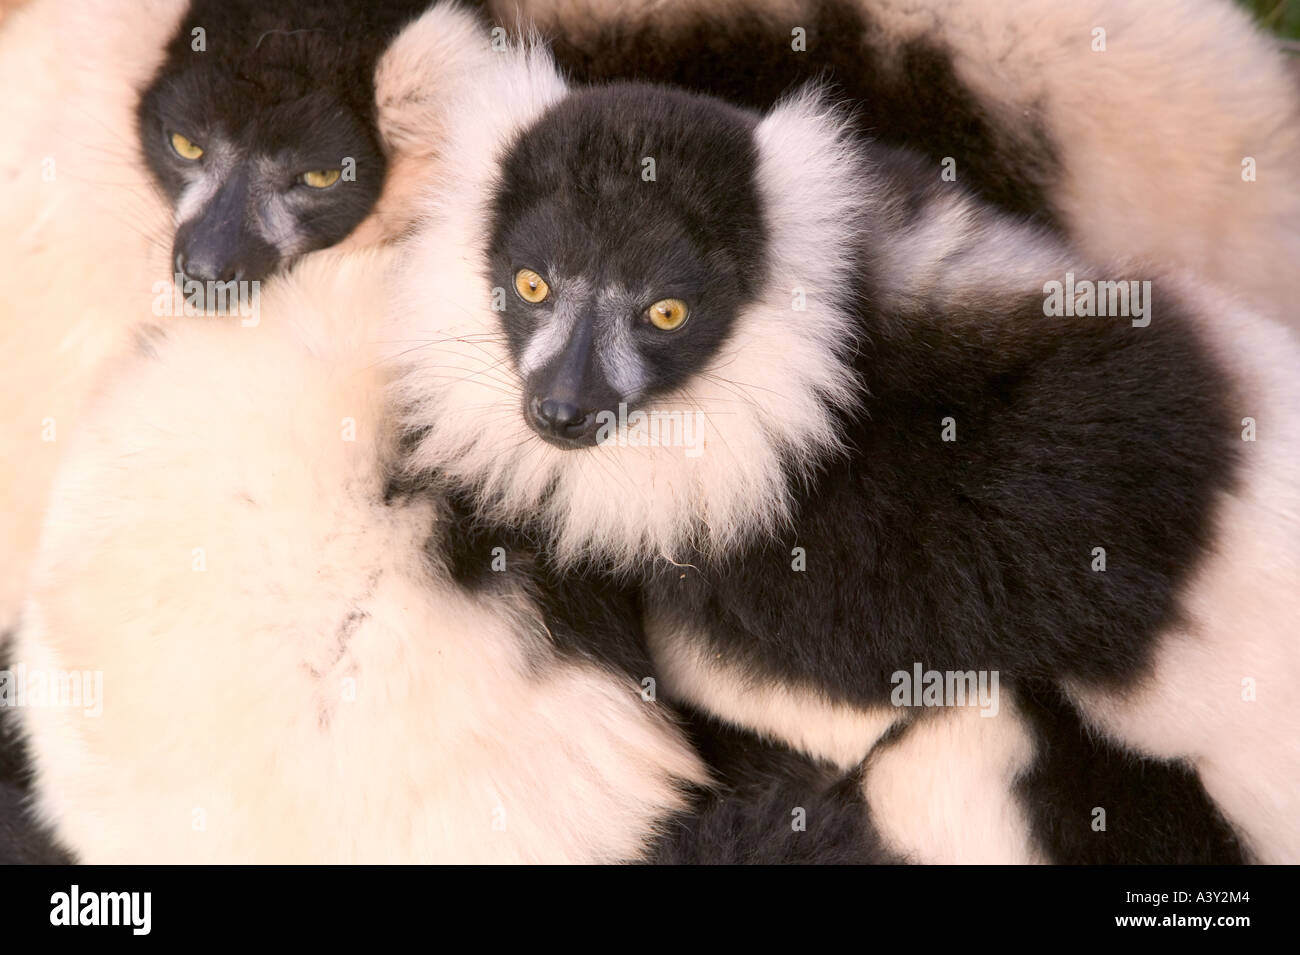 Black and white Ruffed Lemurs huddling together for warmth Stock Photo